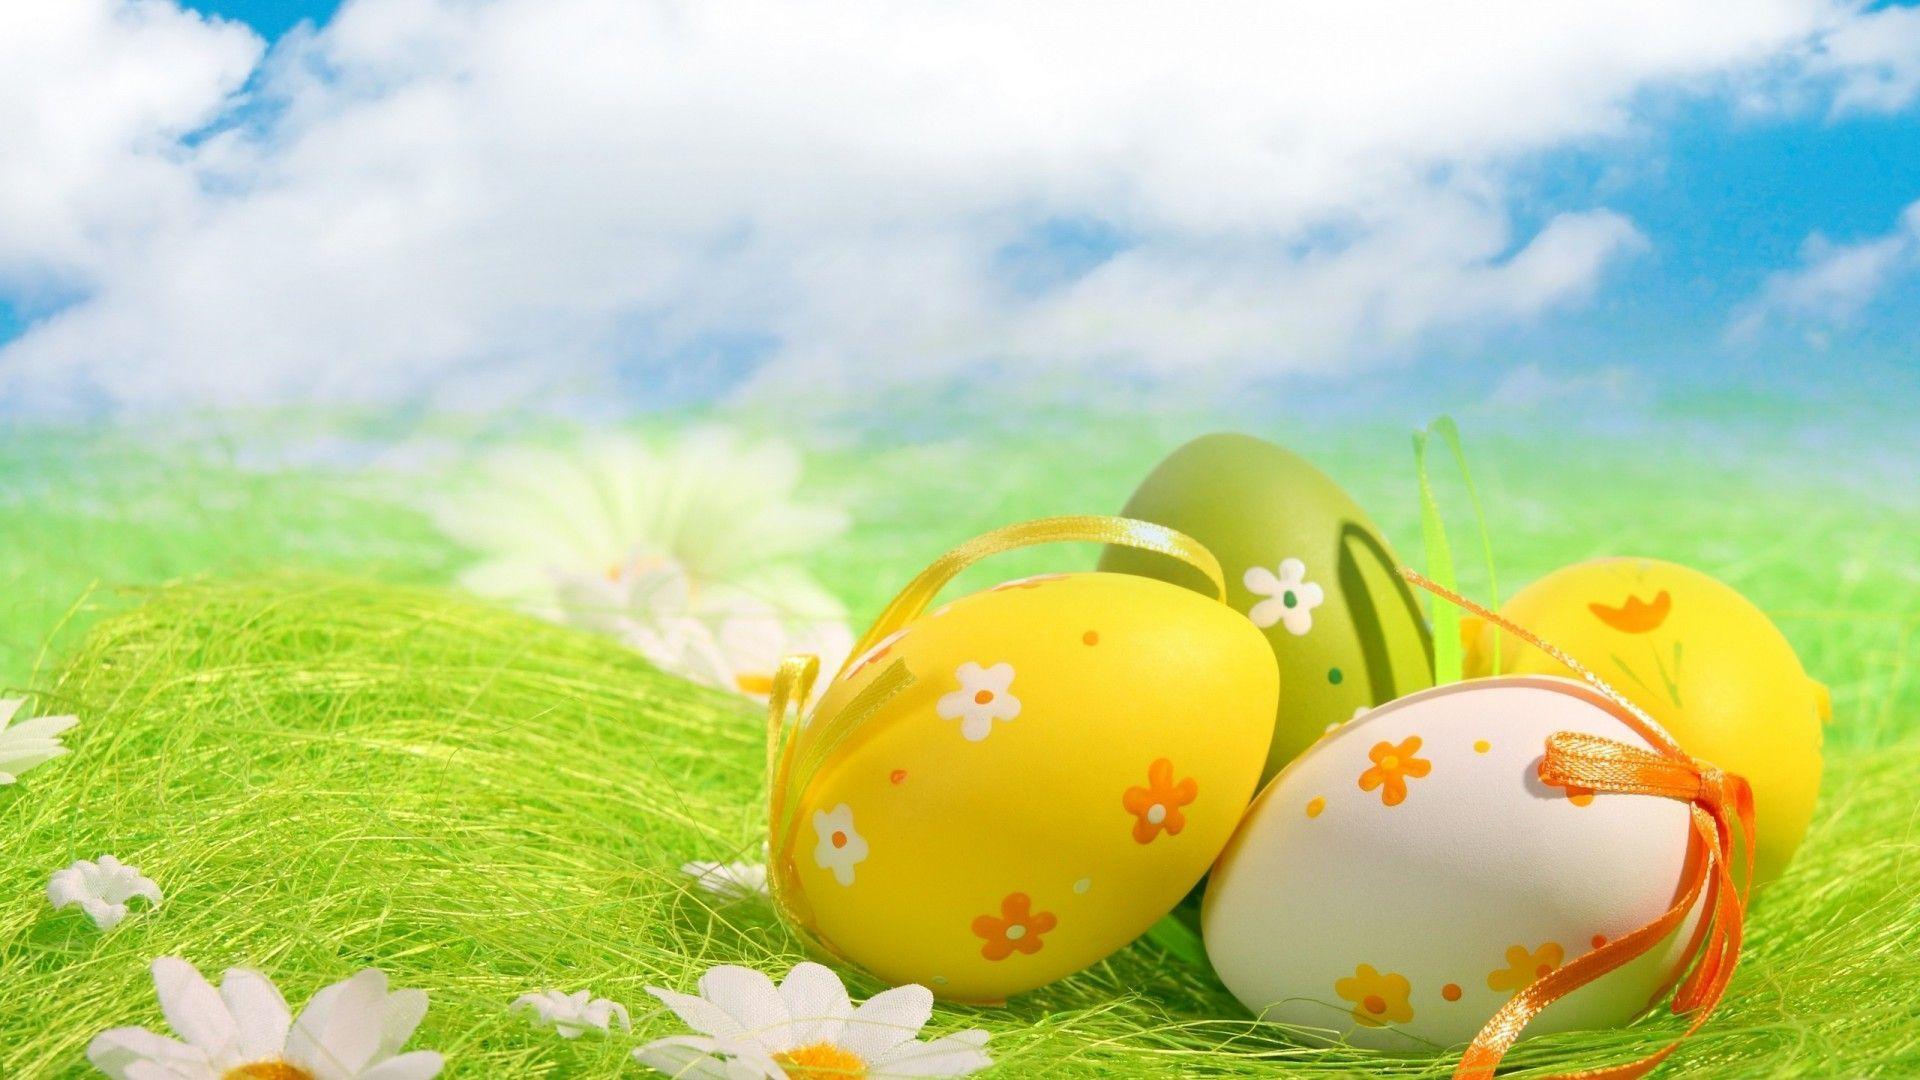 HD Wallpaper of Easter Eggs and Bunny